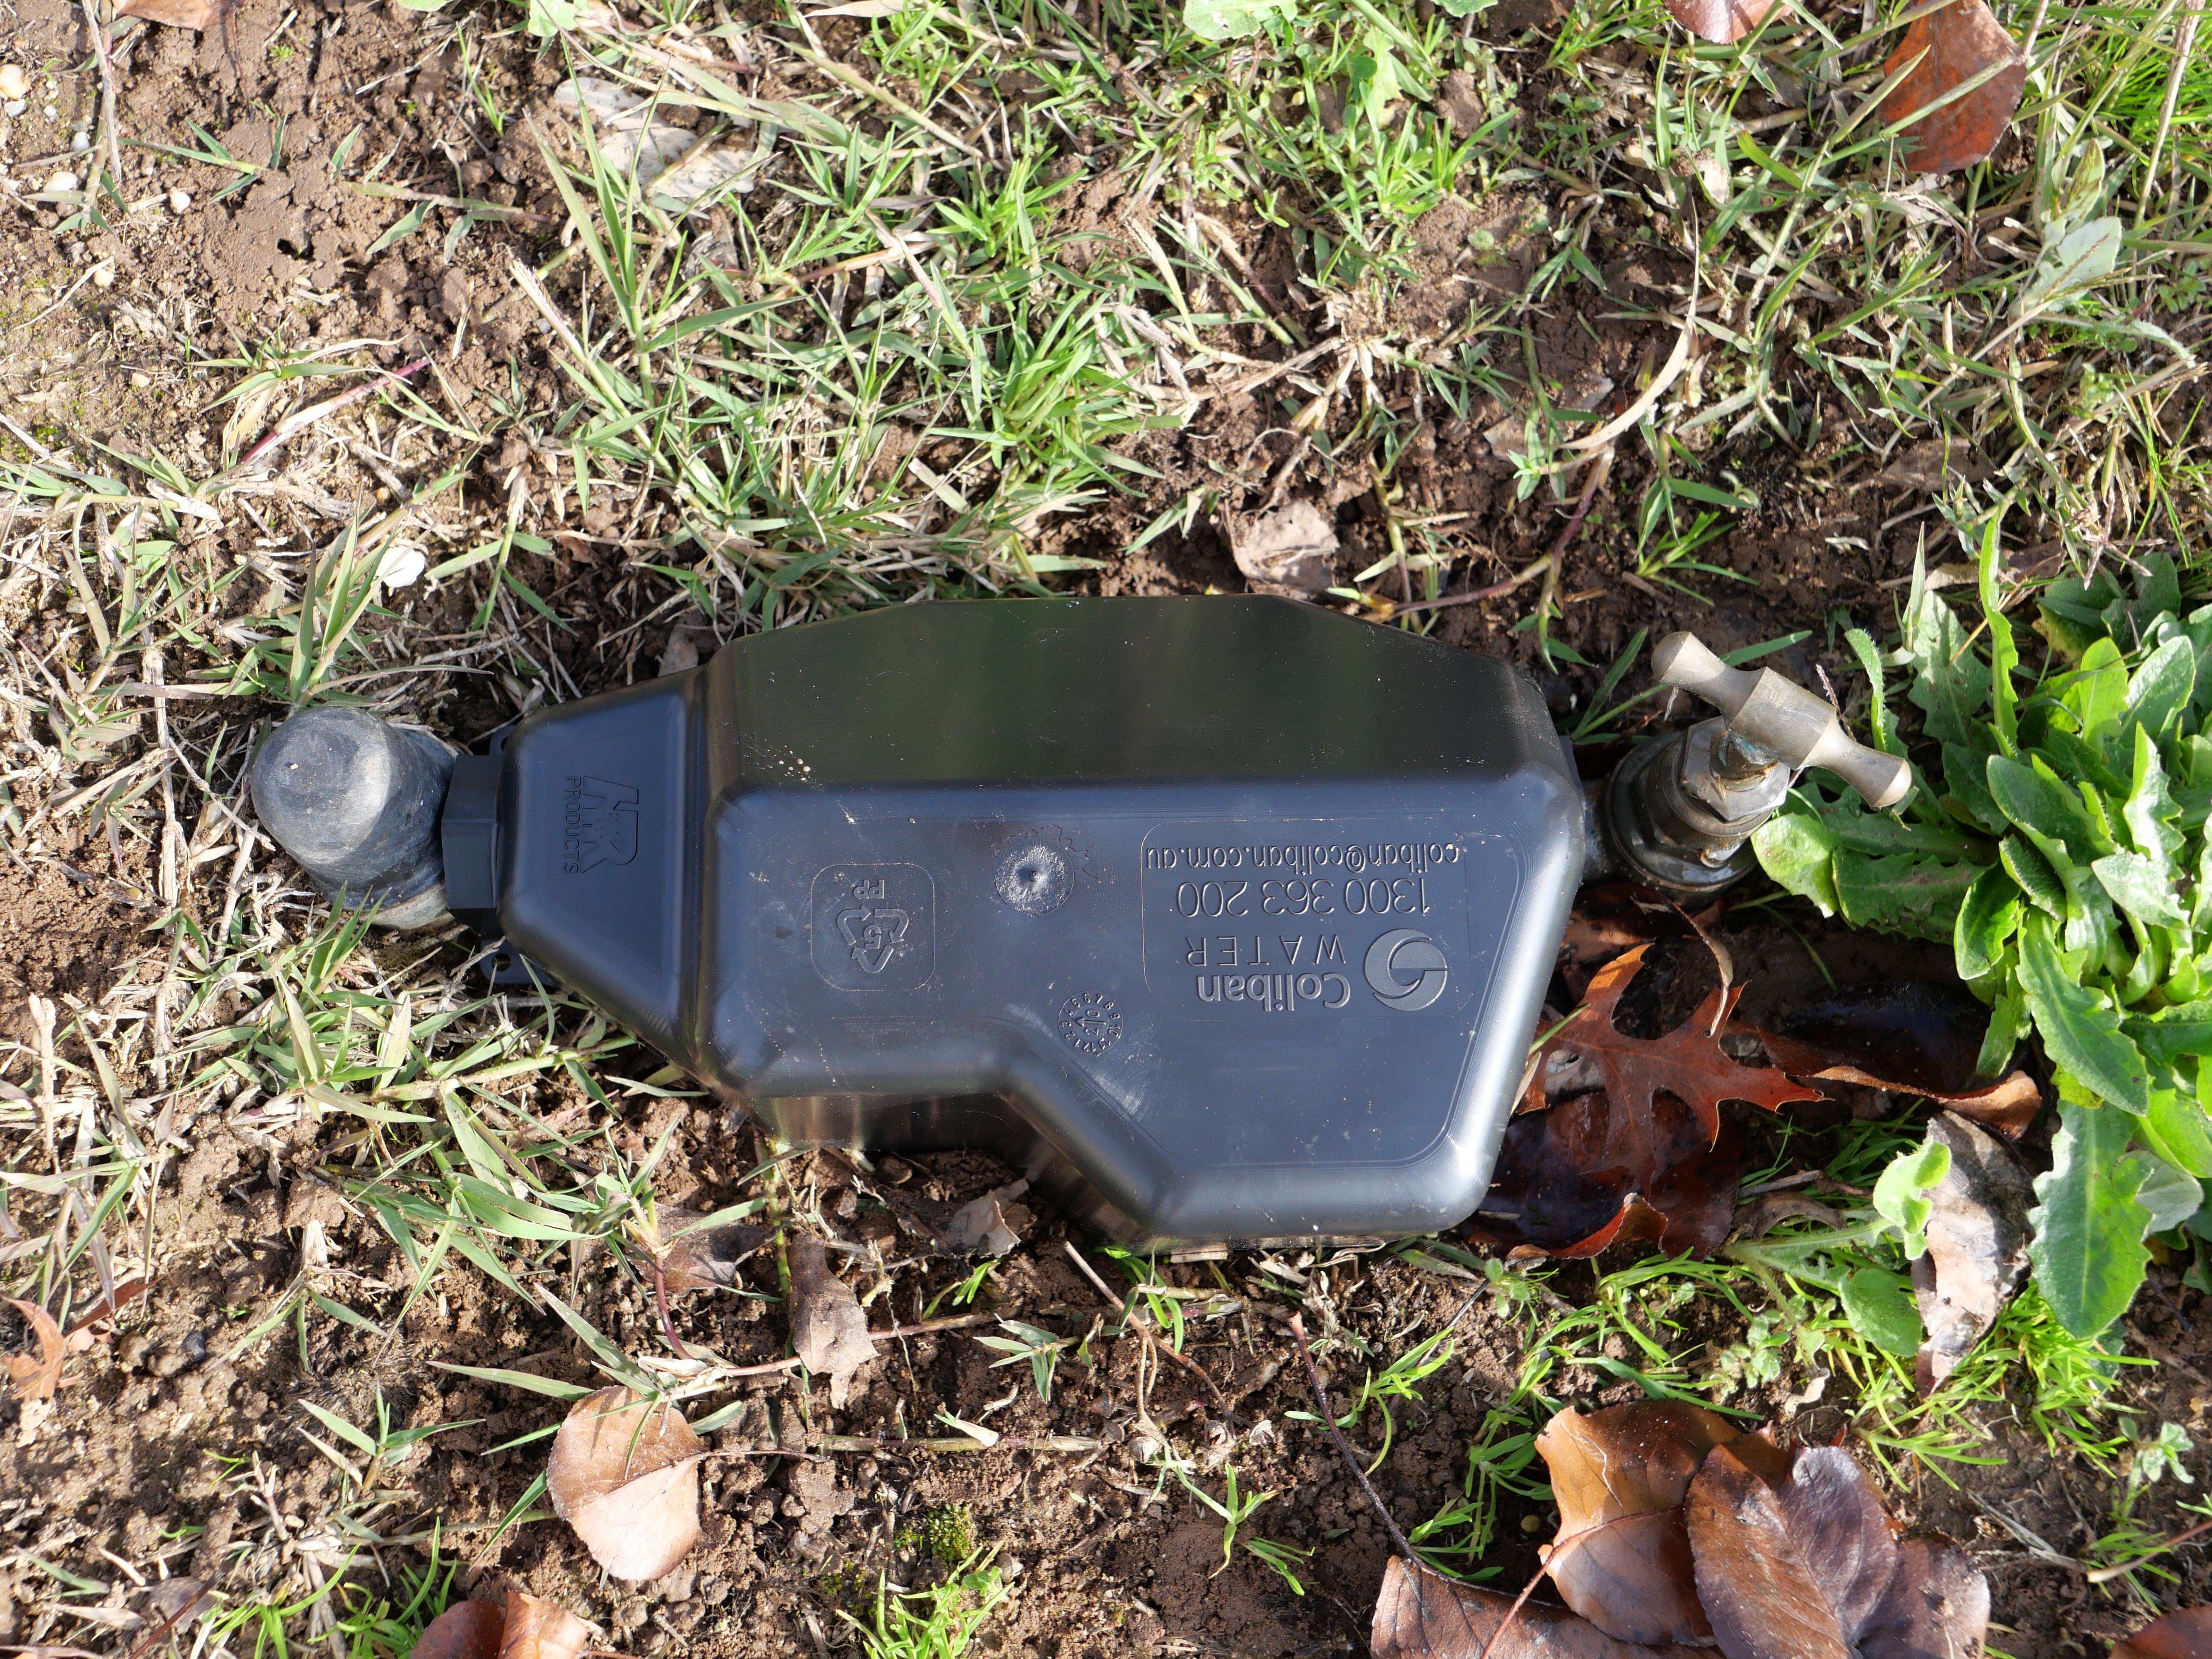 A water meter with a digital cover on it